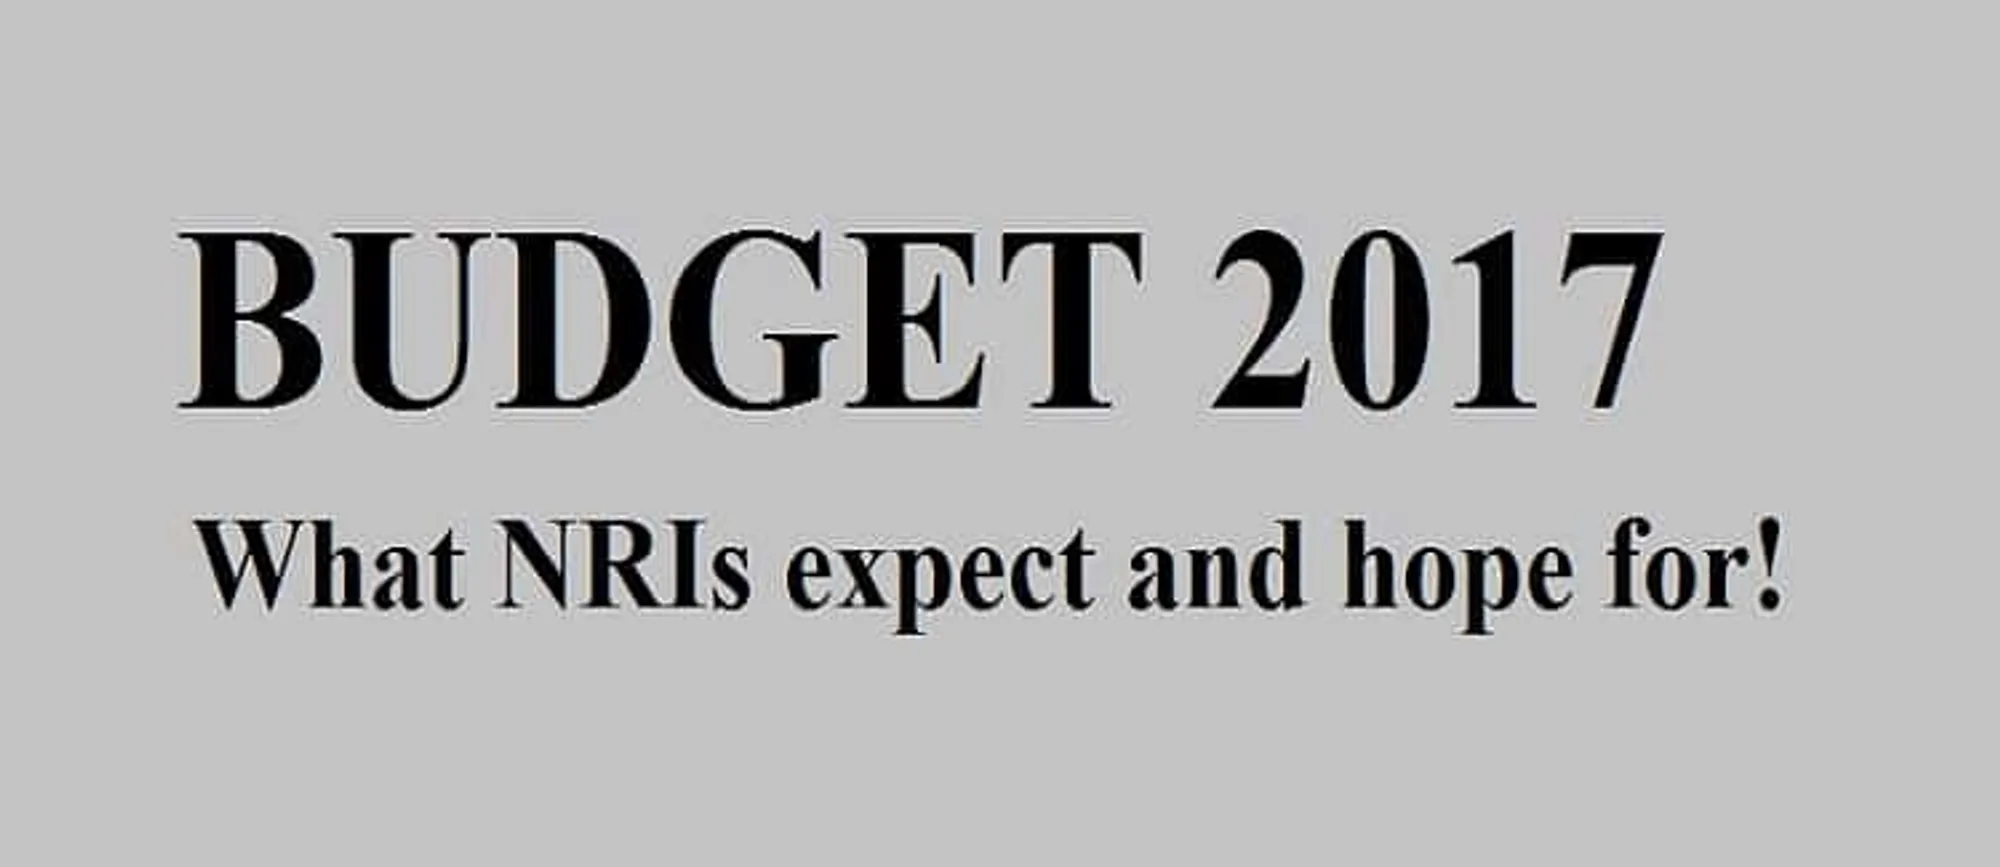 BUDGET 2017 – What NRIs expect and hope for!